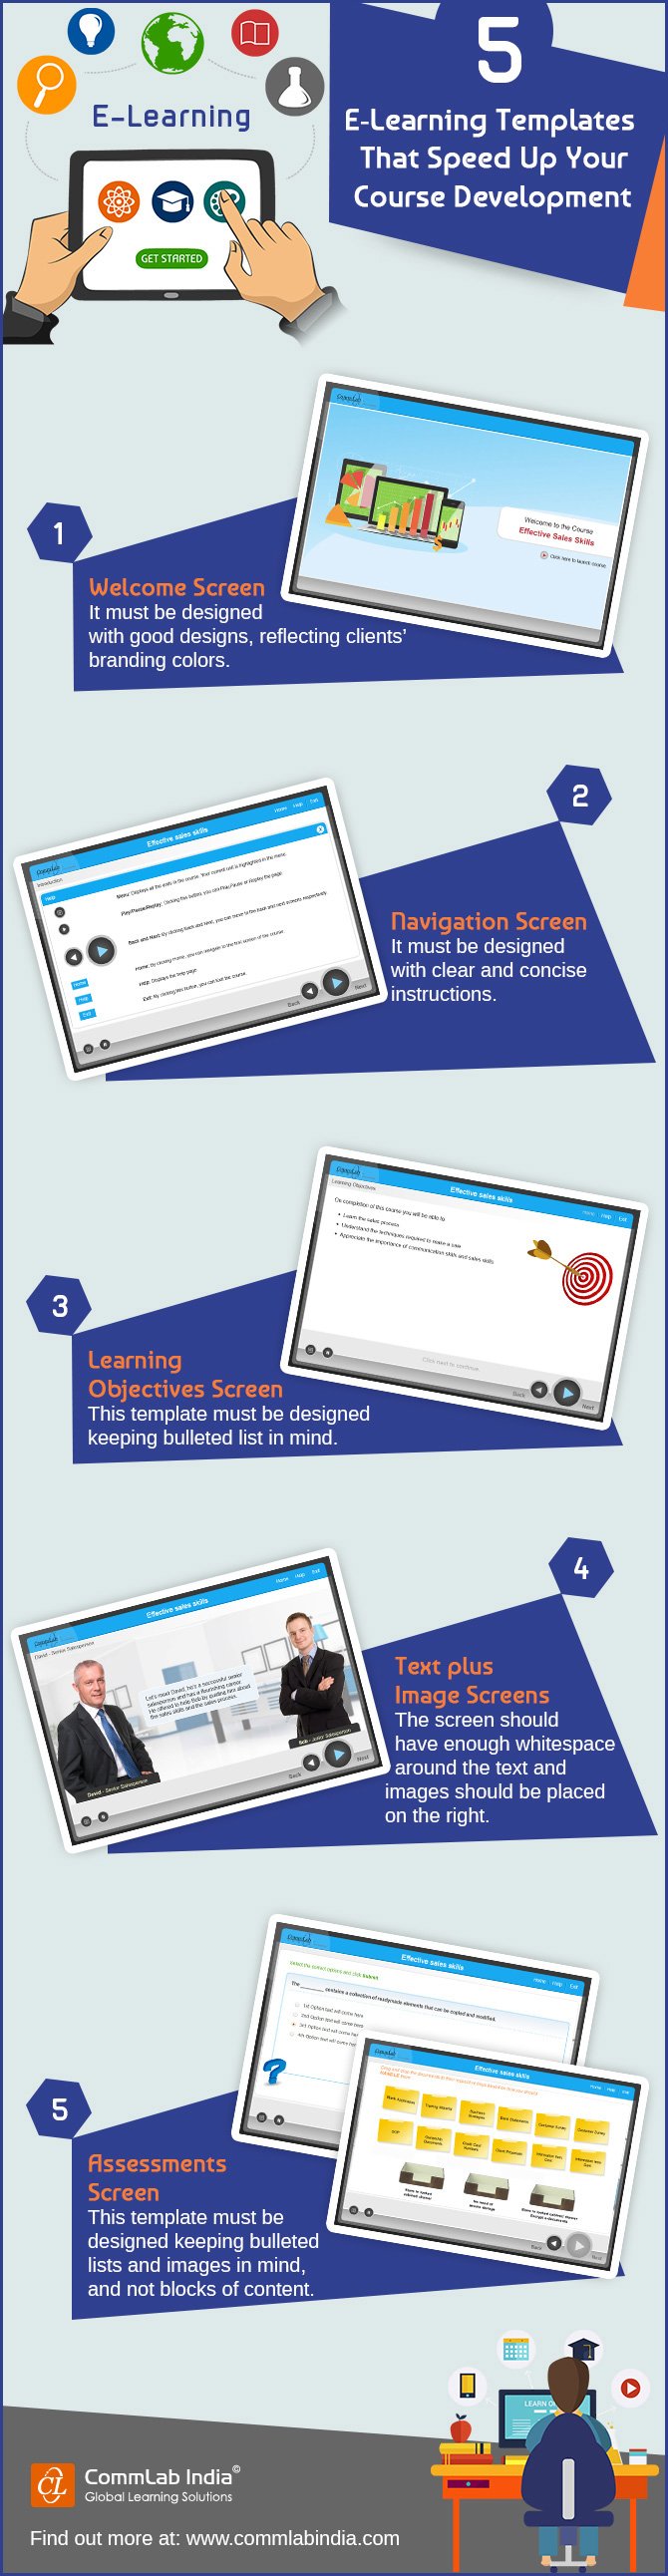 6 E-learning Templates that Speed Up Your Online Training Course Development [Infographic]